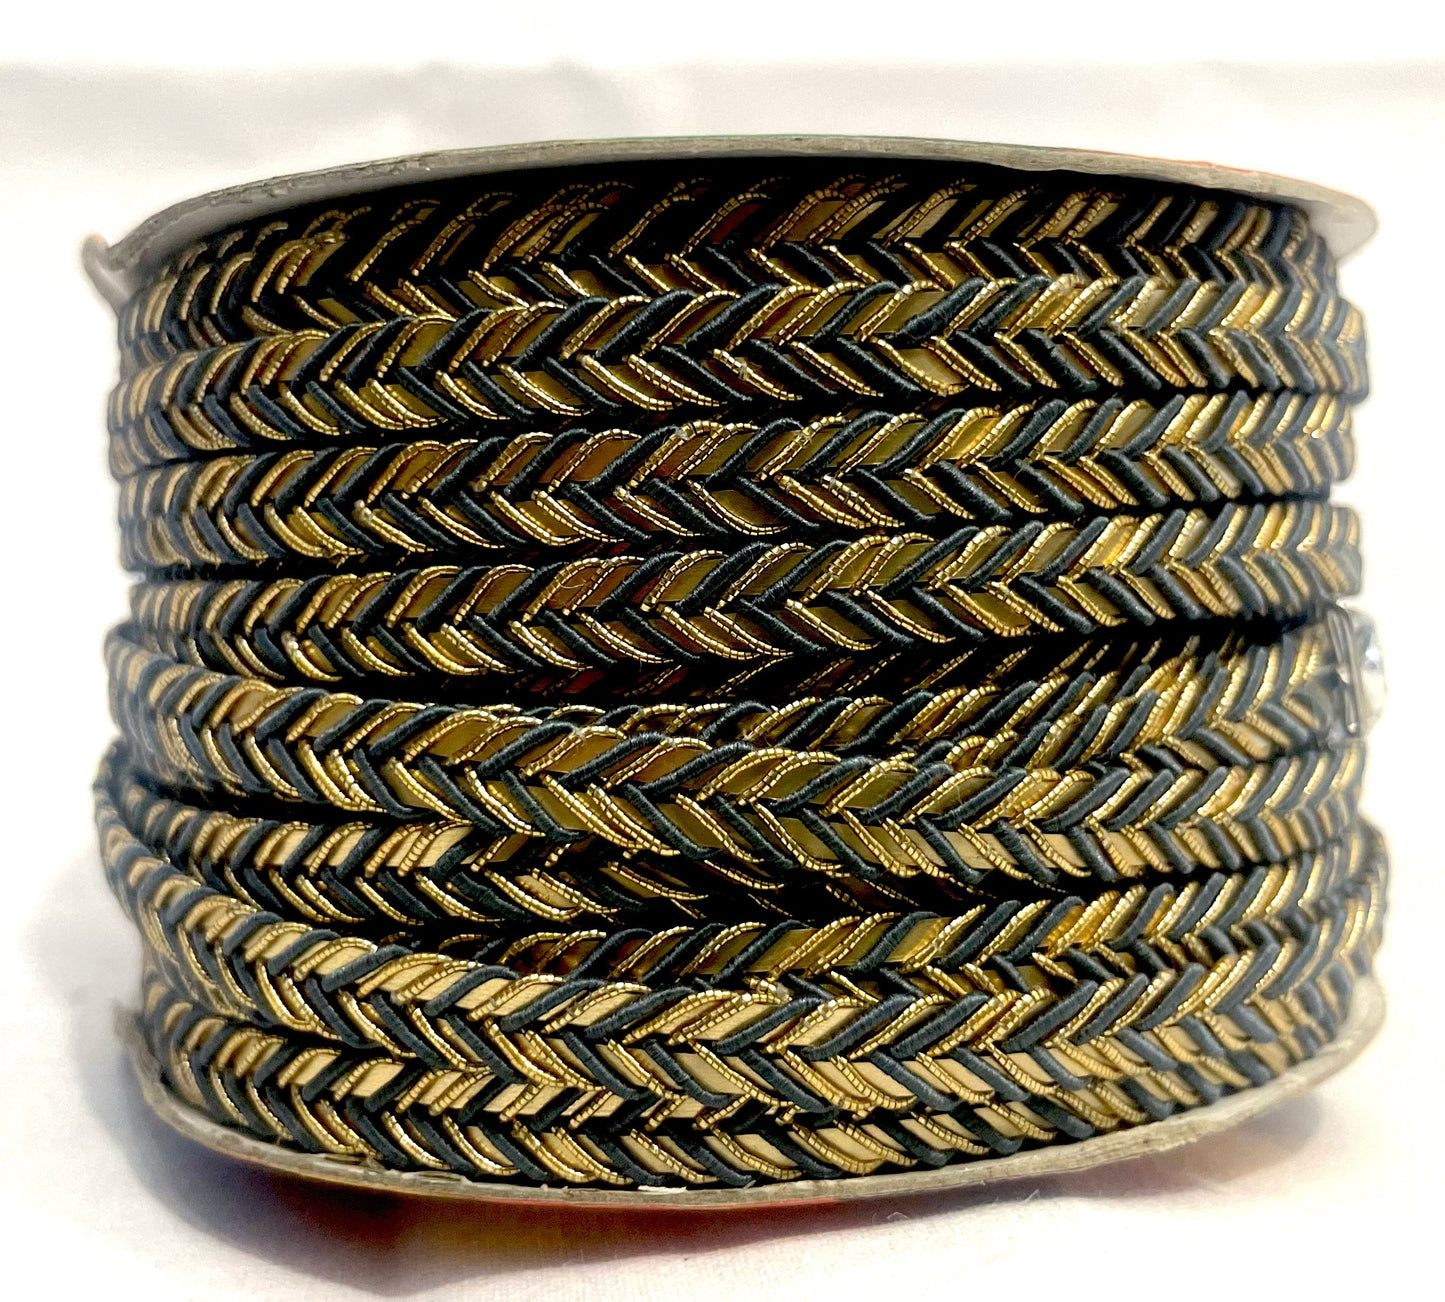 Golden Braid Border, Gray And Golden,  Laces for Dress, Home Décor, Shoe, Bags, Hats, DIY, Handmade, 0.2 inch Broad